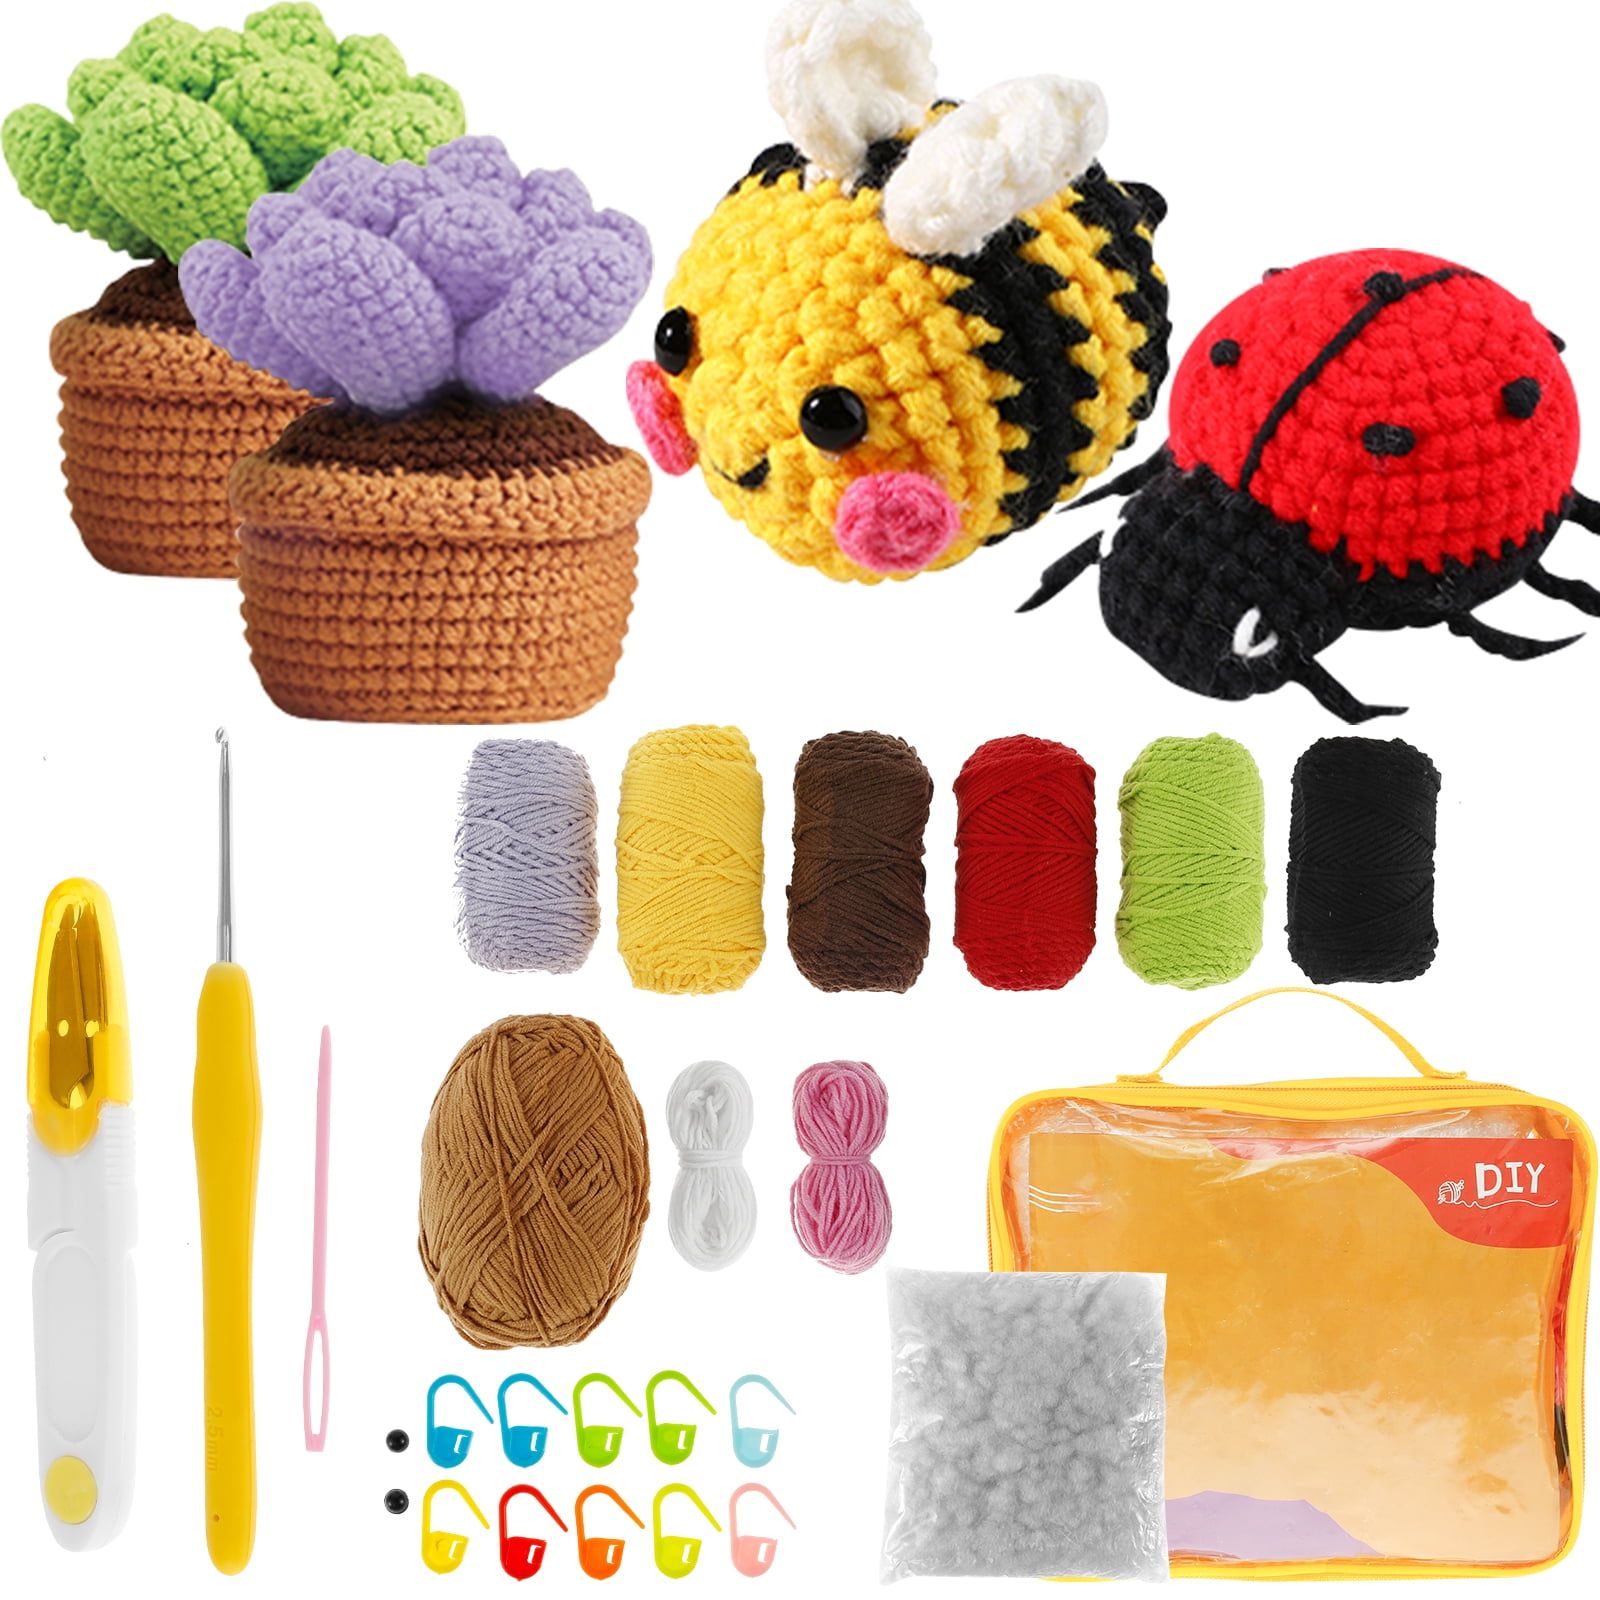 Woobles Crochet Kit For Beginners Succulents And Ladybug DIY